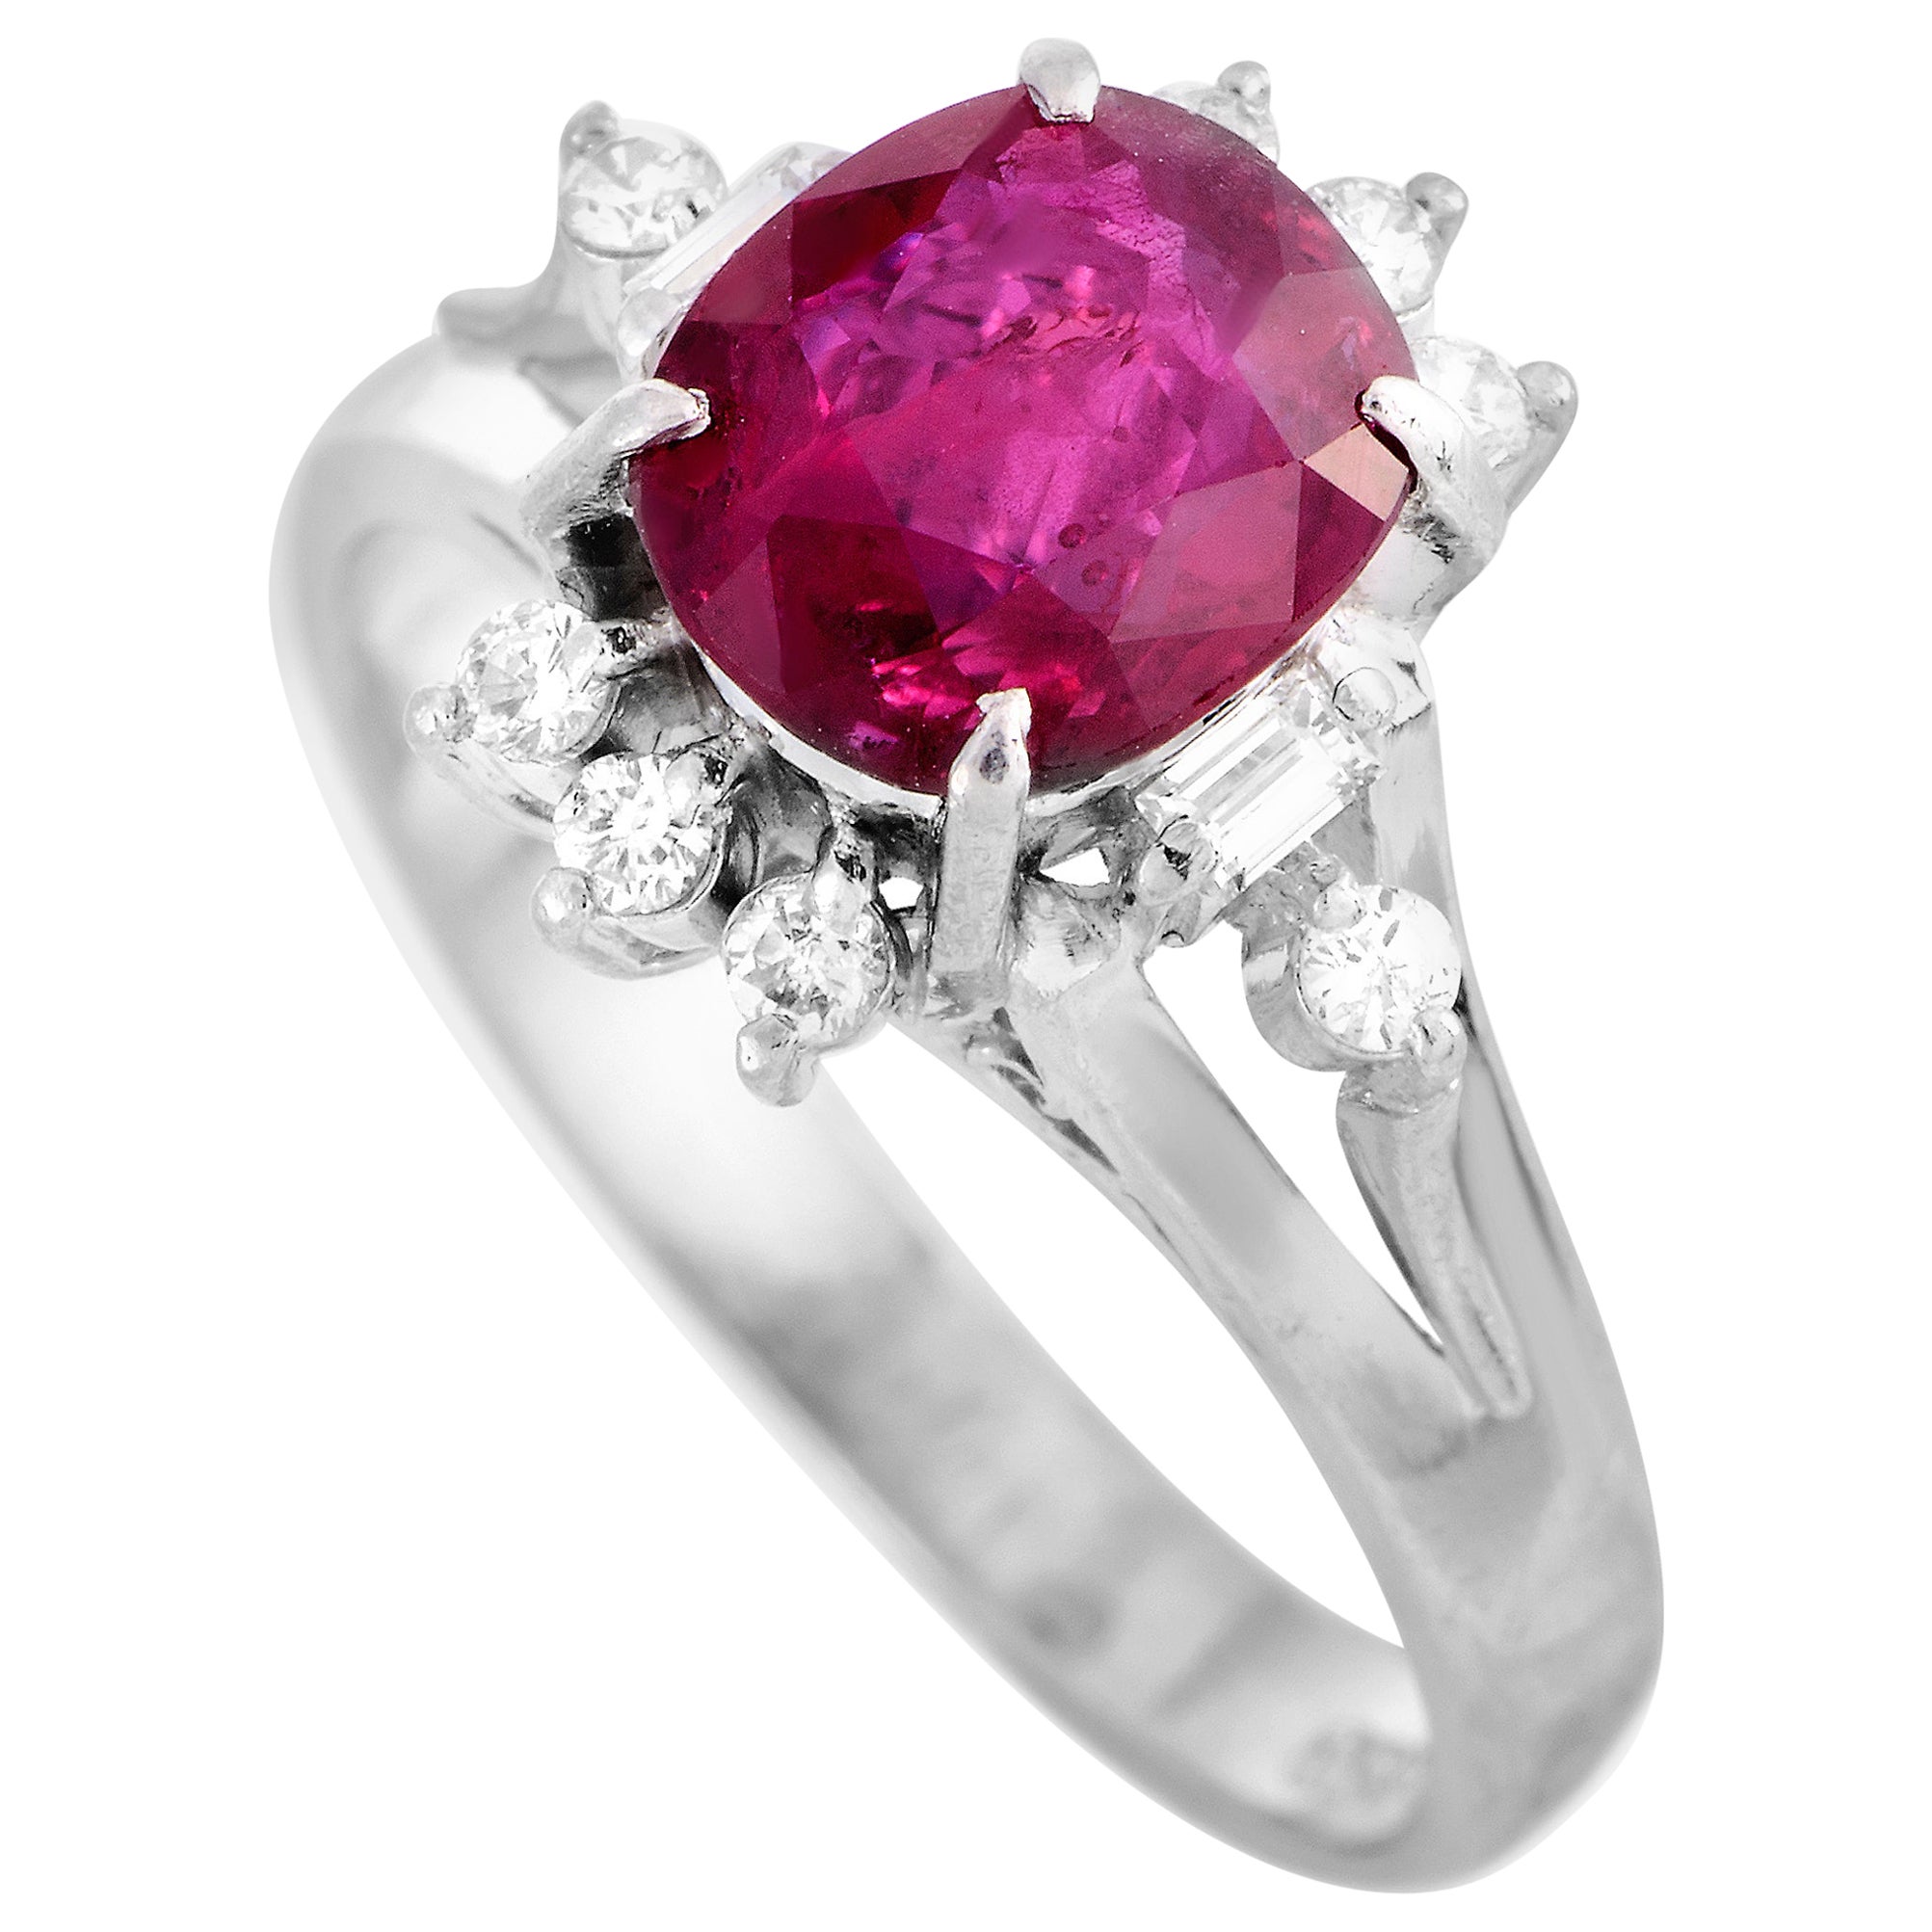 LB Exclusive Platinum 4.10 Carat Diamond and Ruby Ring For Sale at 1stDibs